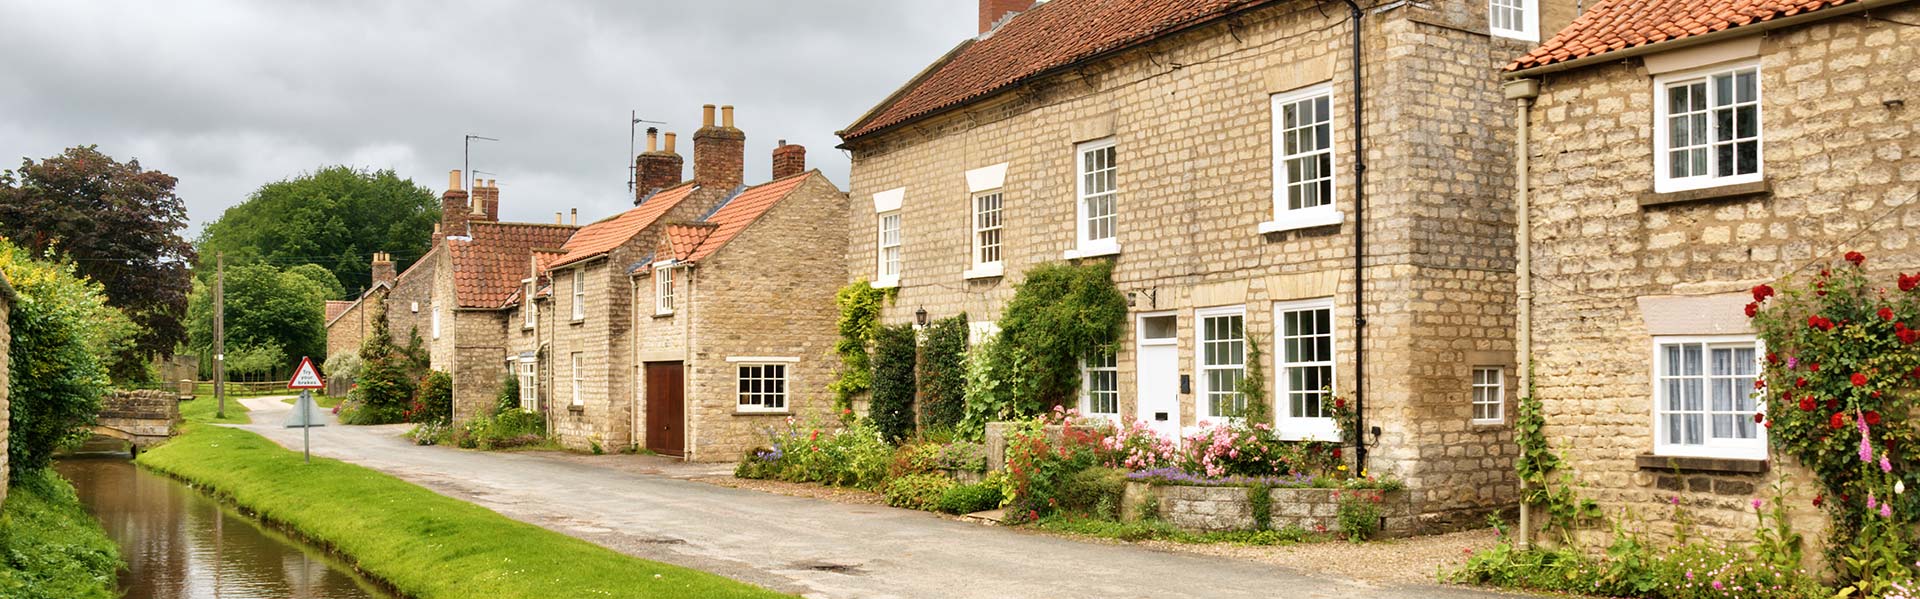 buying property in yorkshire